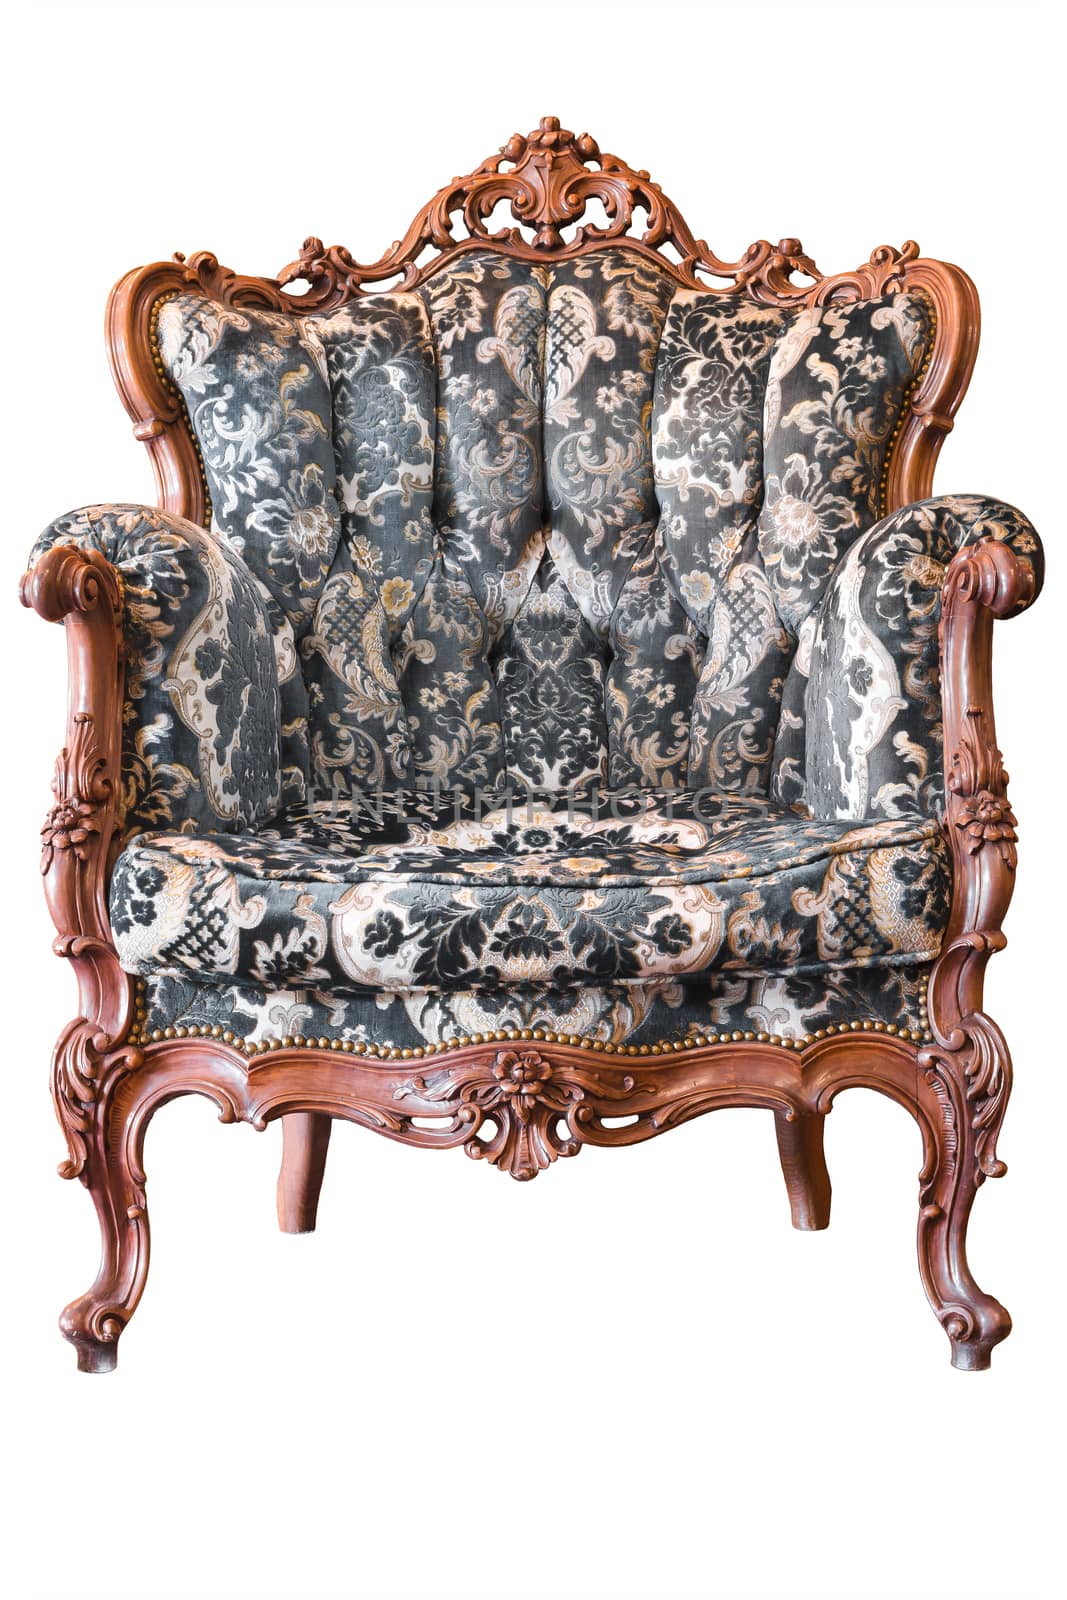 Luxury Vintage Chair  by AEyZRiO